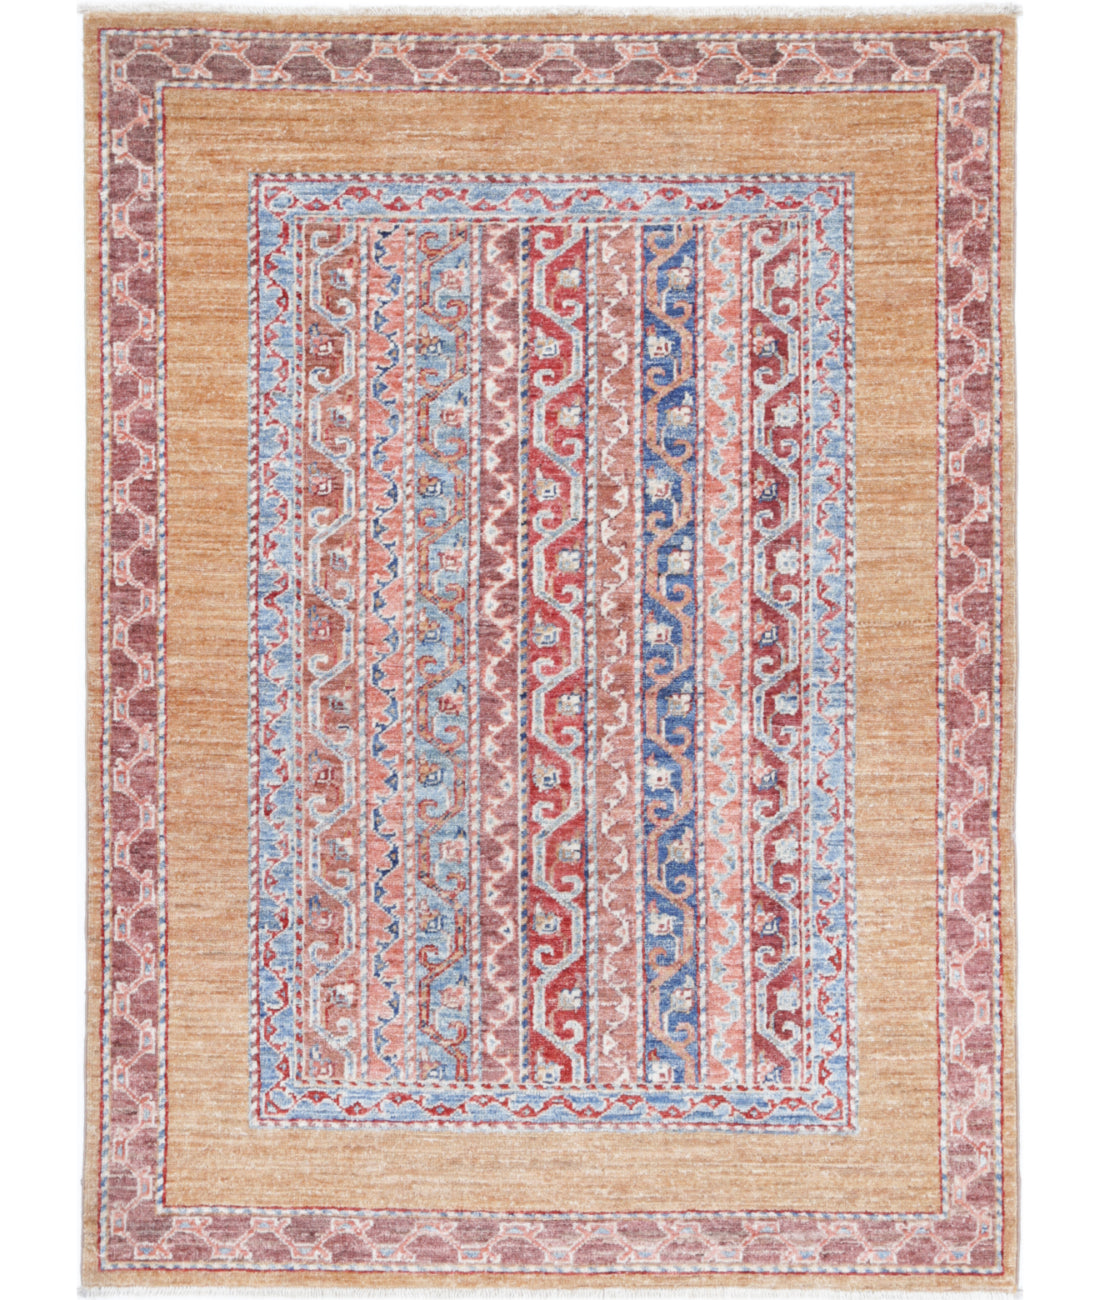 Hand Knotted Shaal Wool Rug - 3'4'' x 4'9'' 3'4'' x 4'9'' (100 X 143) / Multi / Multi